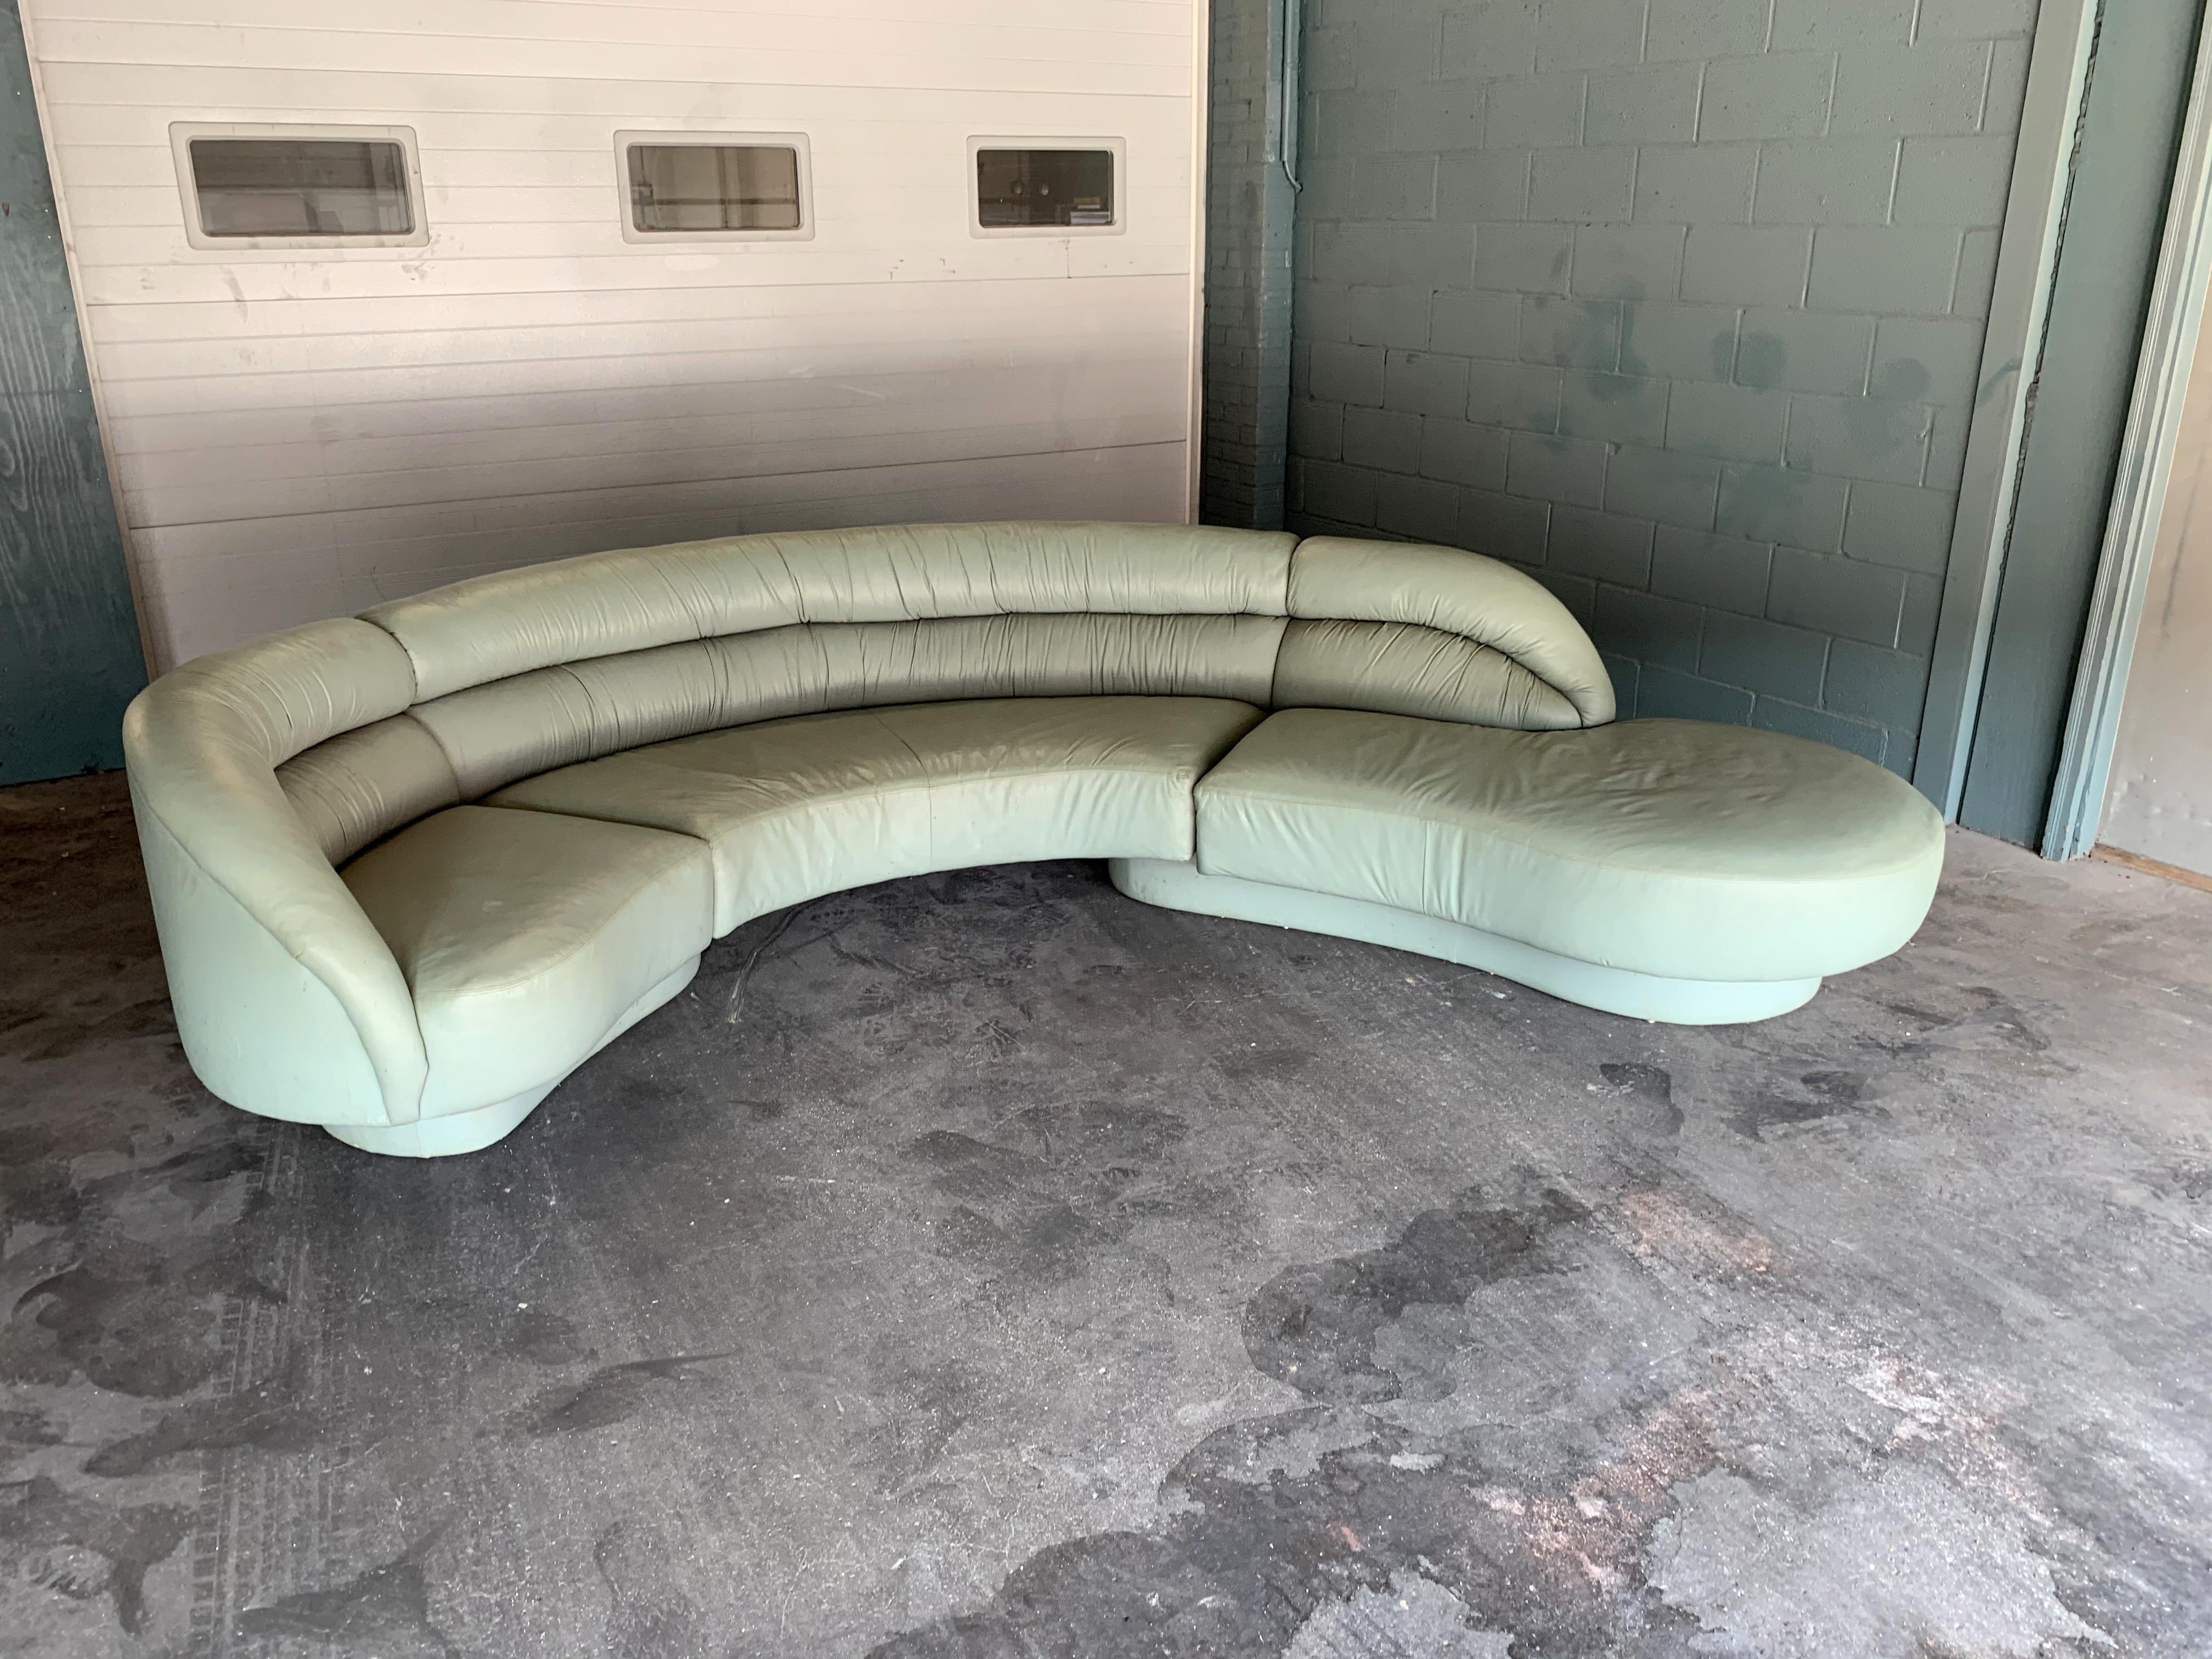 Note: This sectional will need to be reupholstered.

Although this sectional will need to be recovered, it's still one of the best designs from Designer, Vladimir Kagan. The curved lines of this piece are exceptional.
This is a very rare sofa and